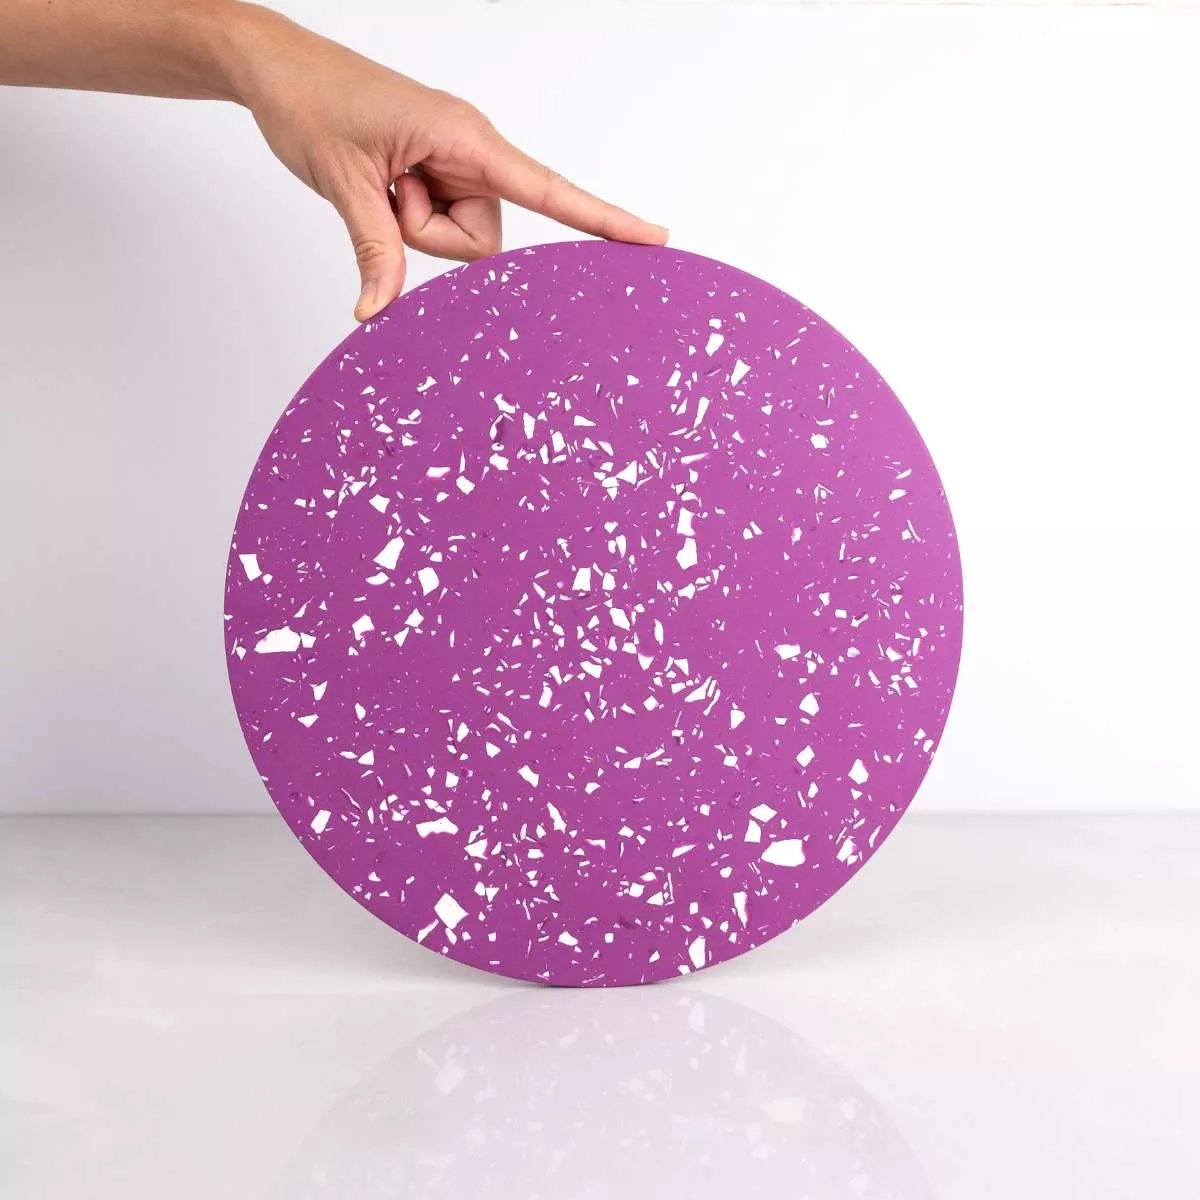 Terrazzo Round Tray Large Terrazzo Round Tray Large, Handmade Home Decorations by Lieon